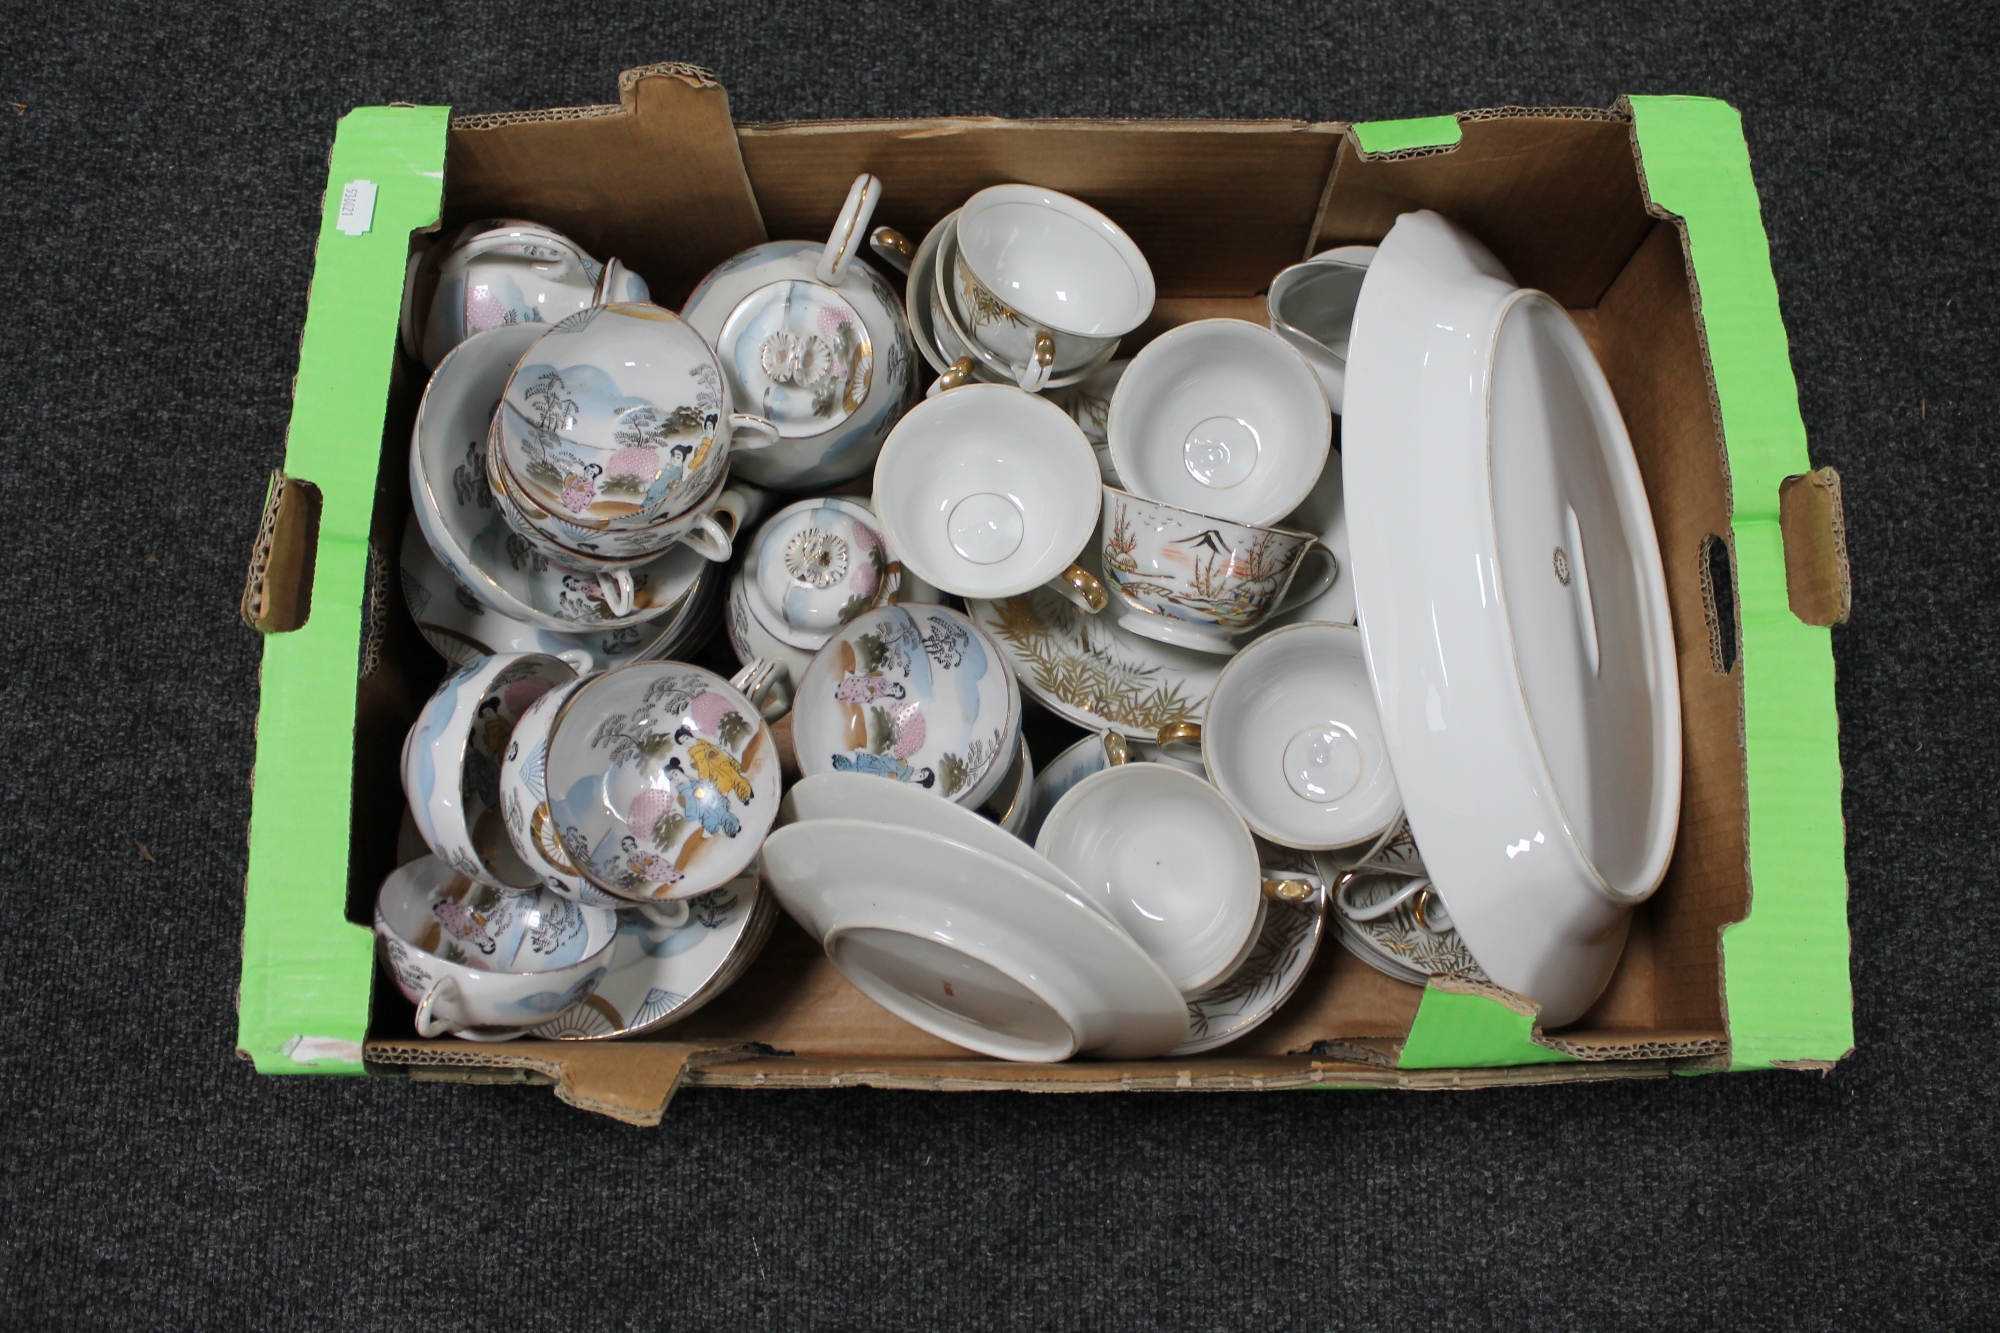 A box of Japanese dinner service and an eggshell tea service